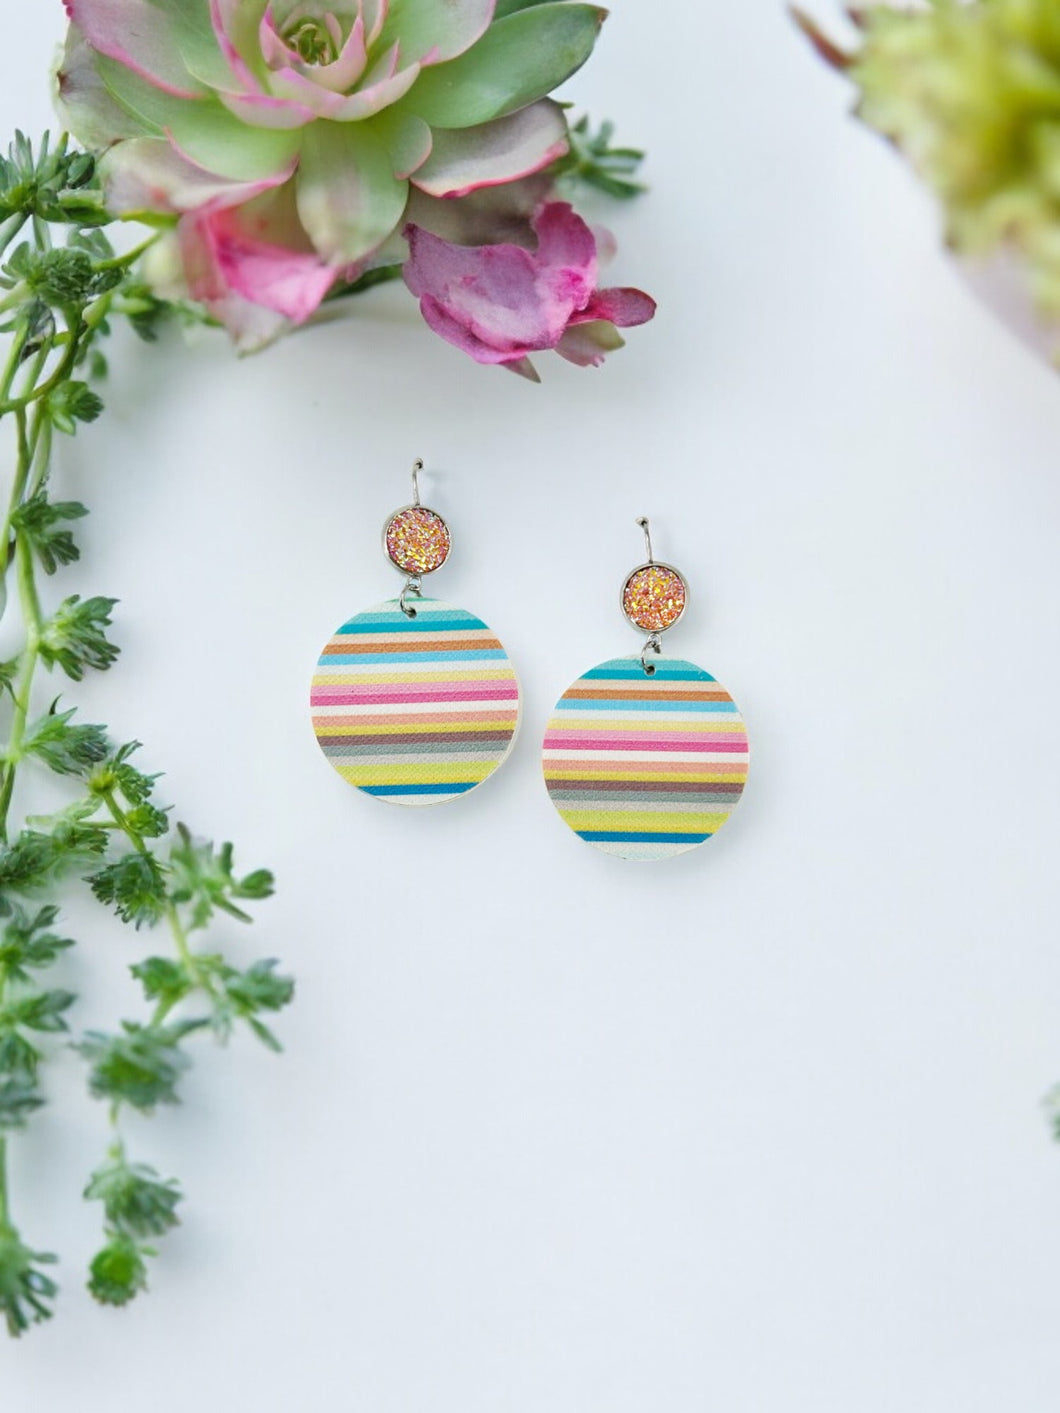 Druzy Agate and Striped Faux Leather Earrings - E19-2967